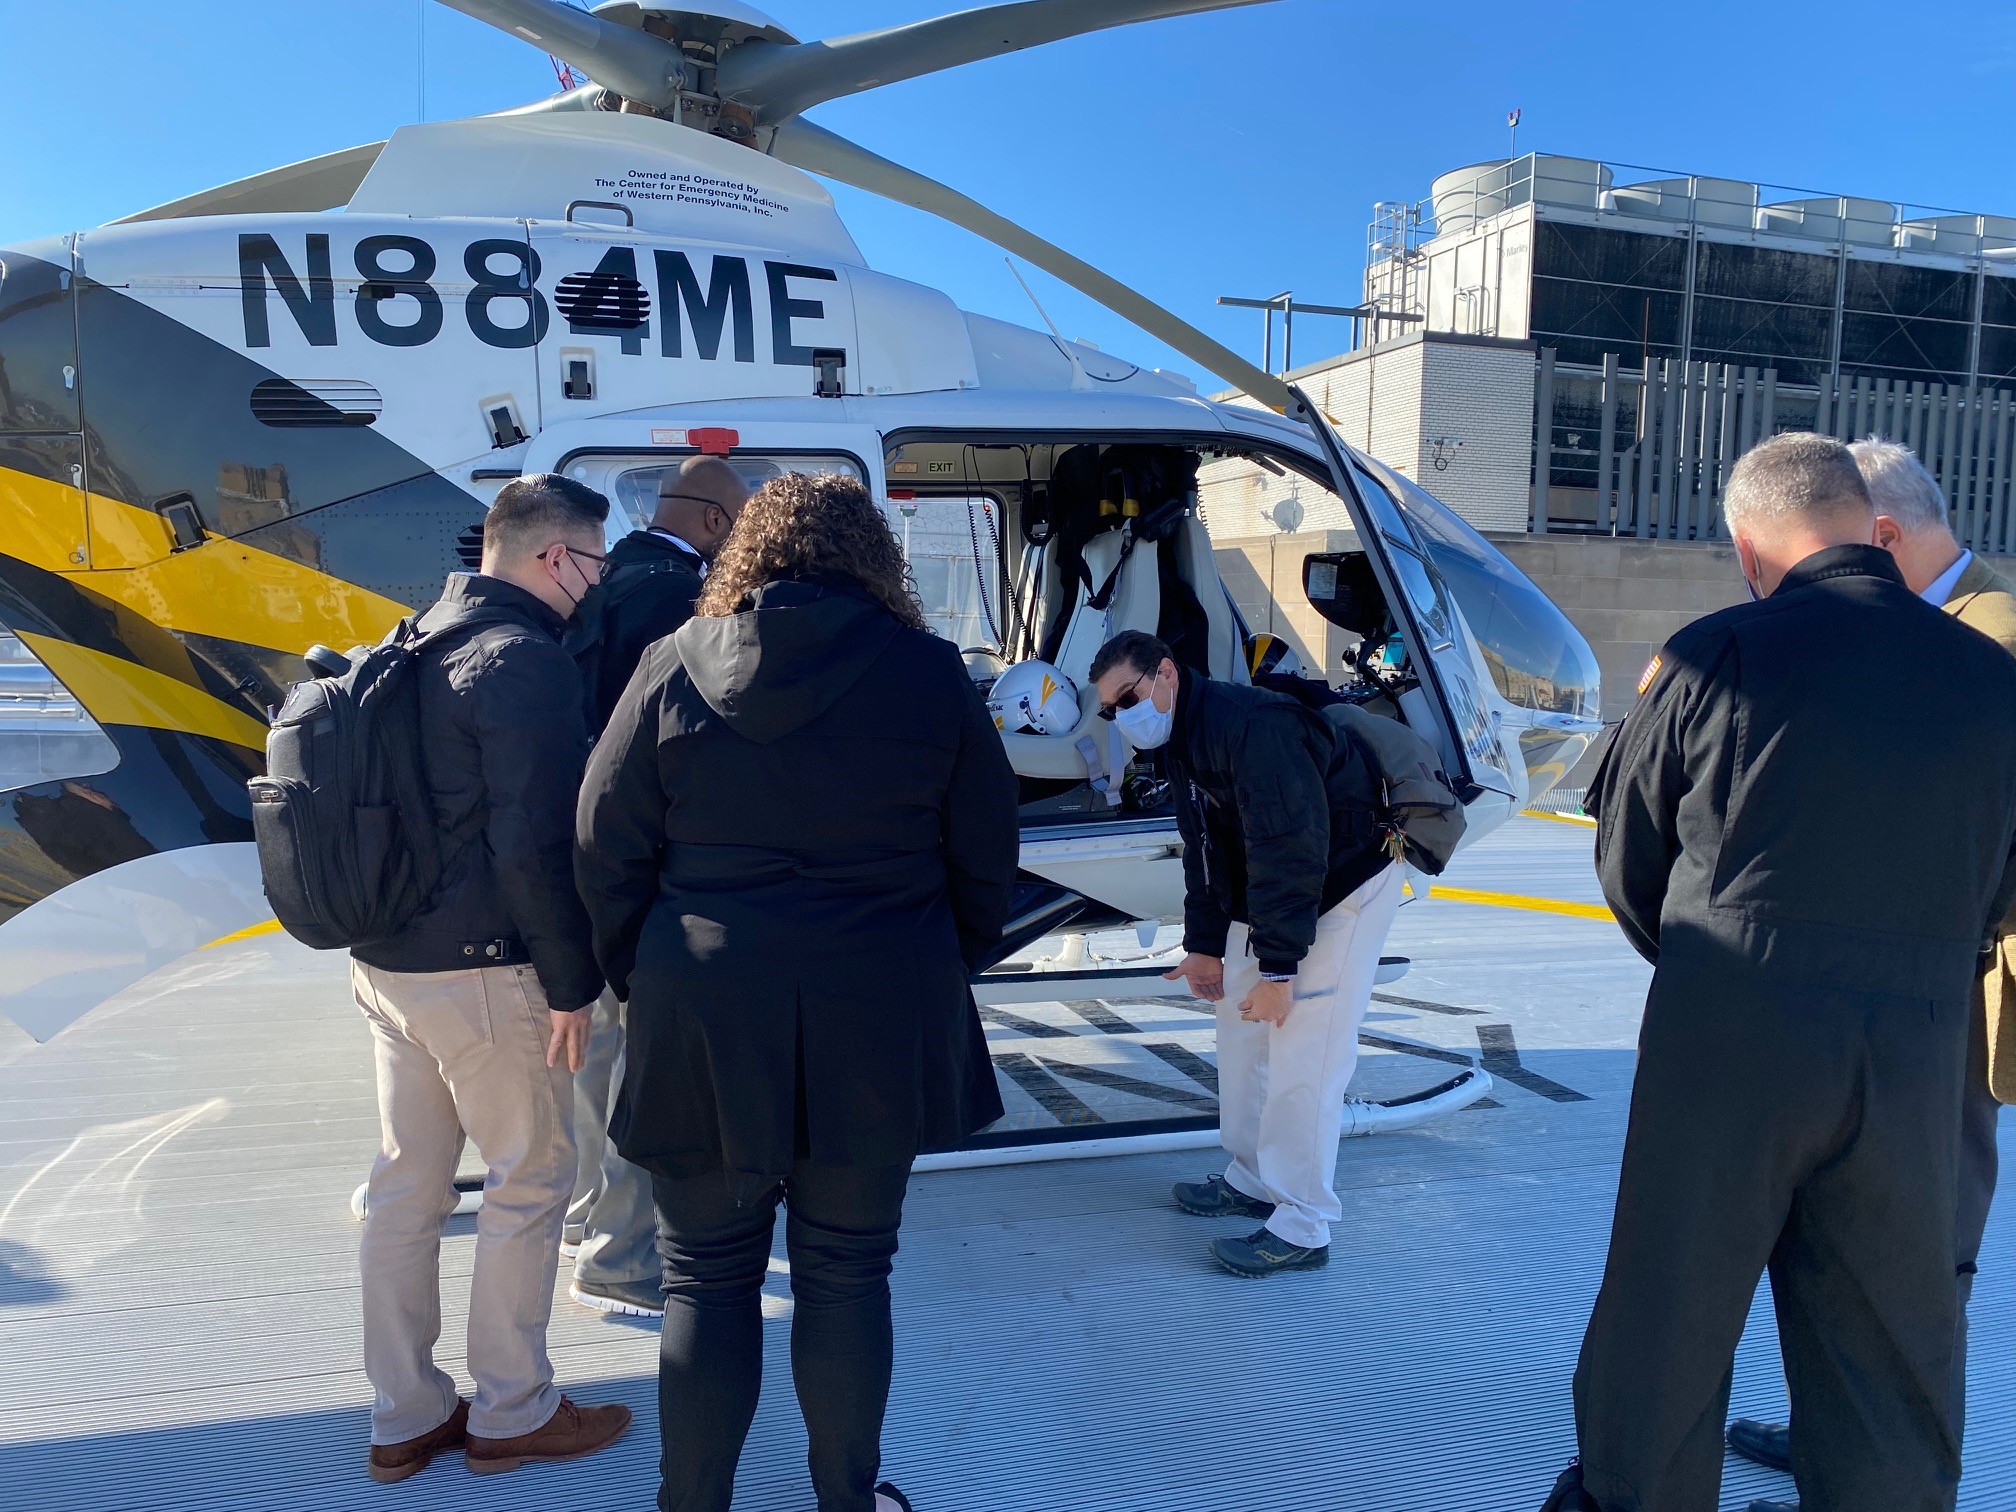 Dr. Feinstein and U.S. Department of Defense representatives toured a Pittsburgh helipad.